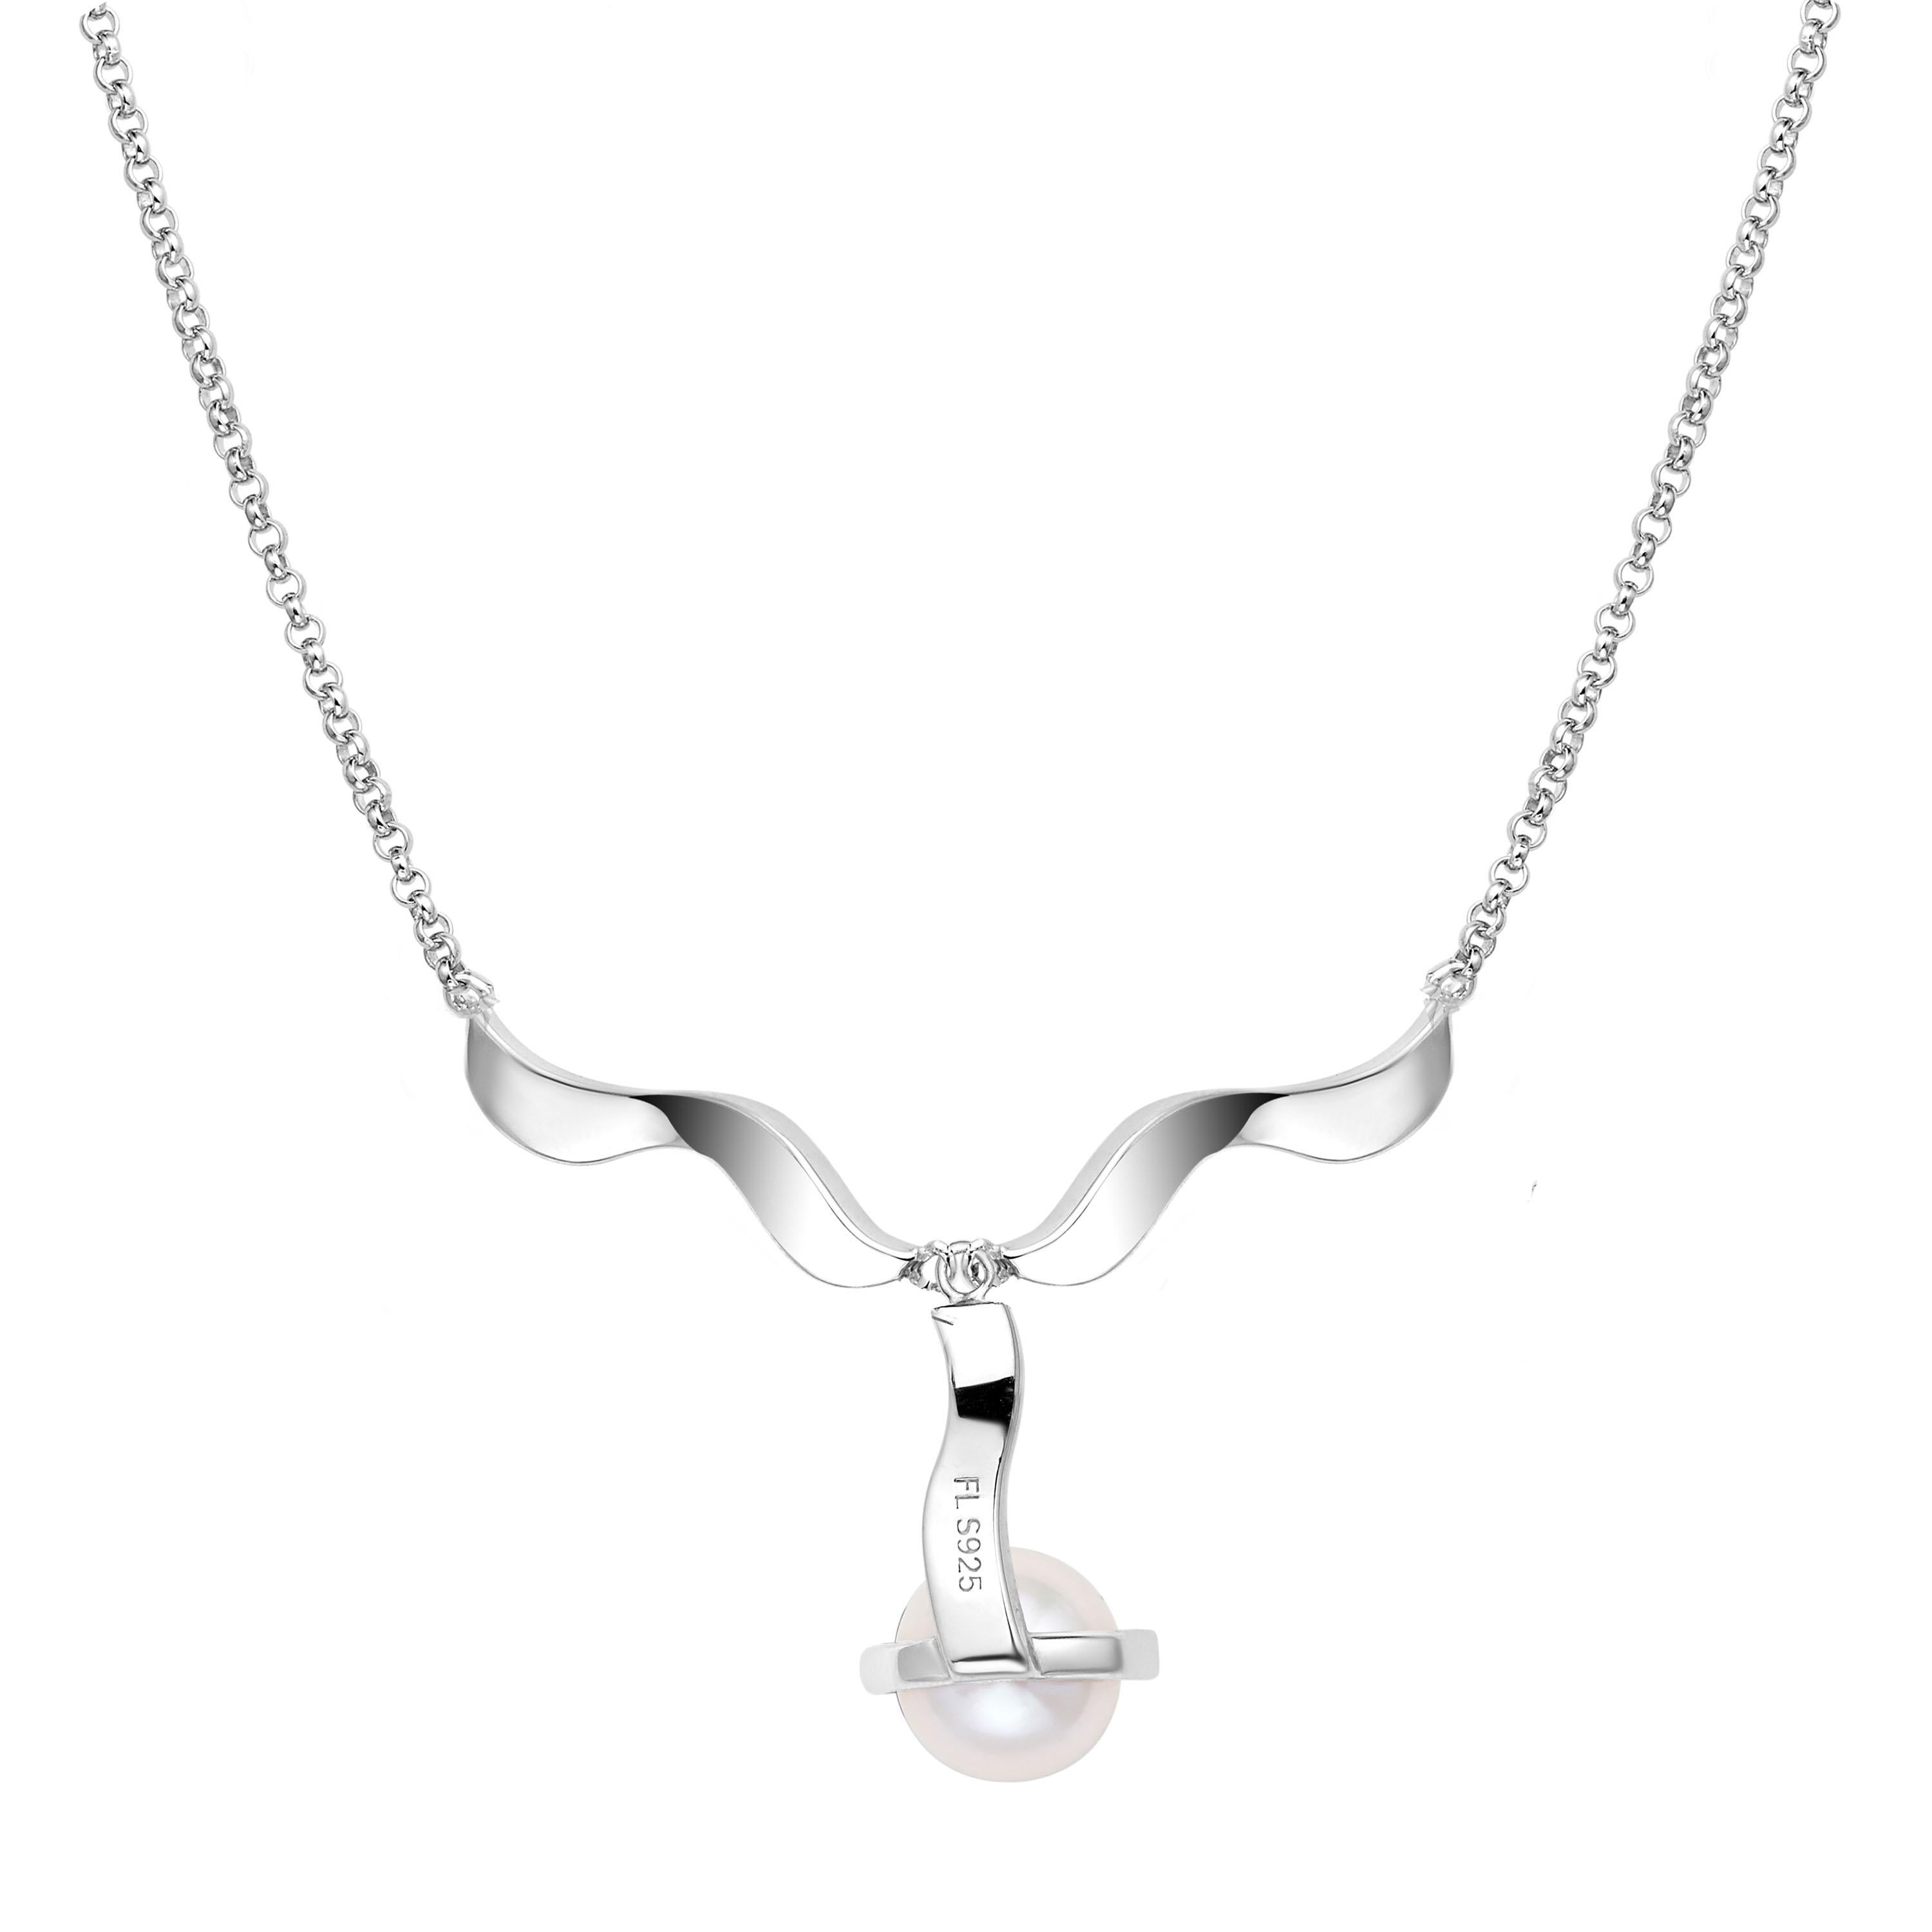 A collection that captures the grace and elegance of ballet. Inspired by the artistry and fluid movements of dancers twirling effortlessly on stage, each piece in this collection is a testament to beauty in motion. Pirouette ribbon unit necklace